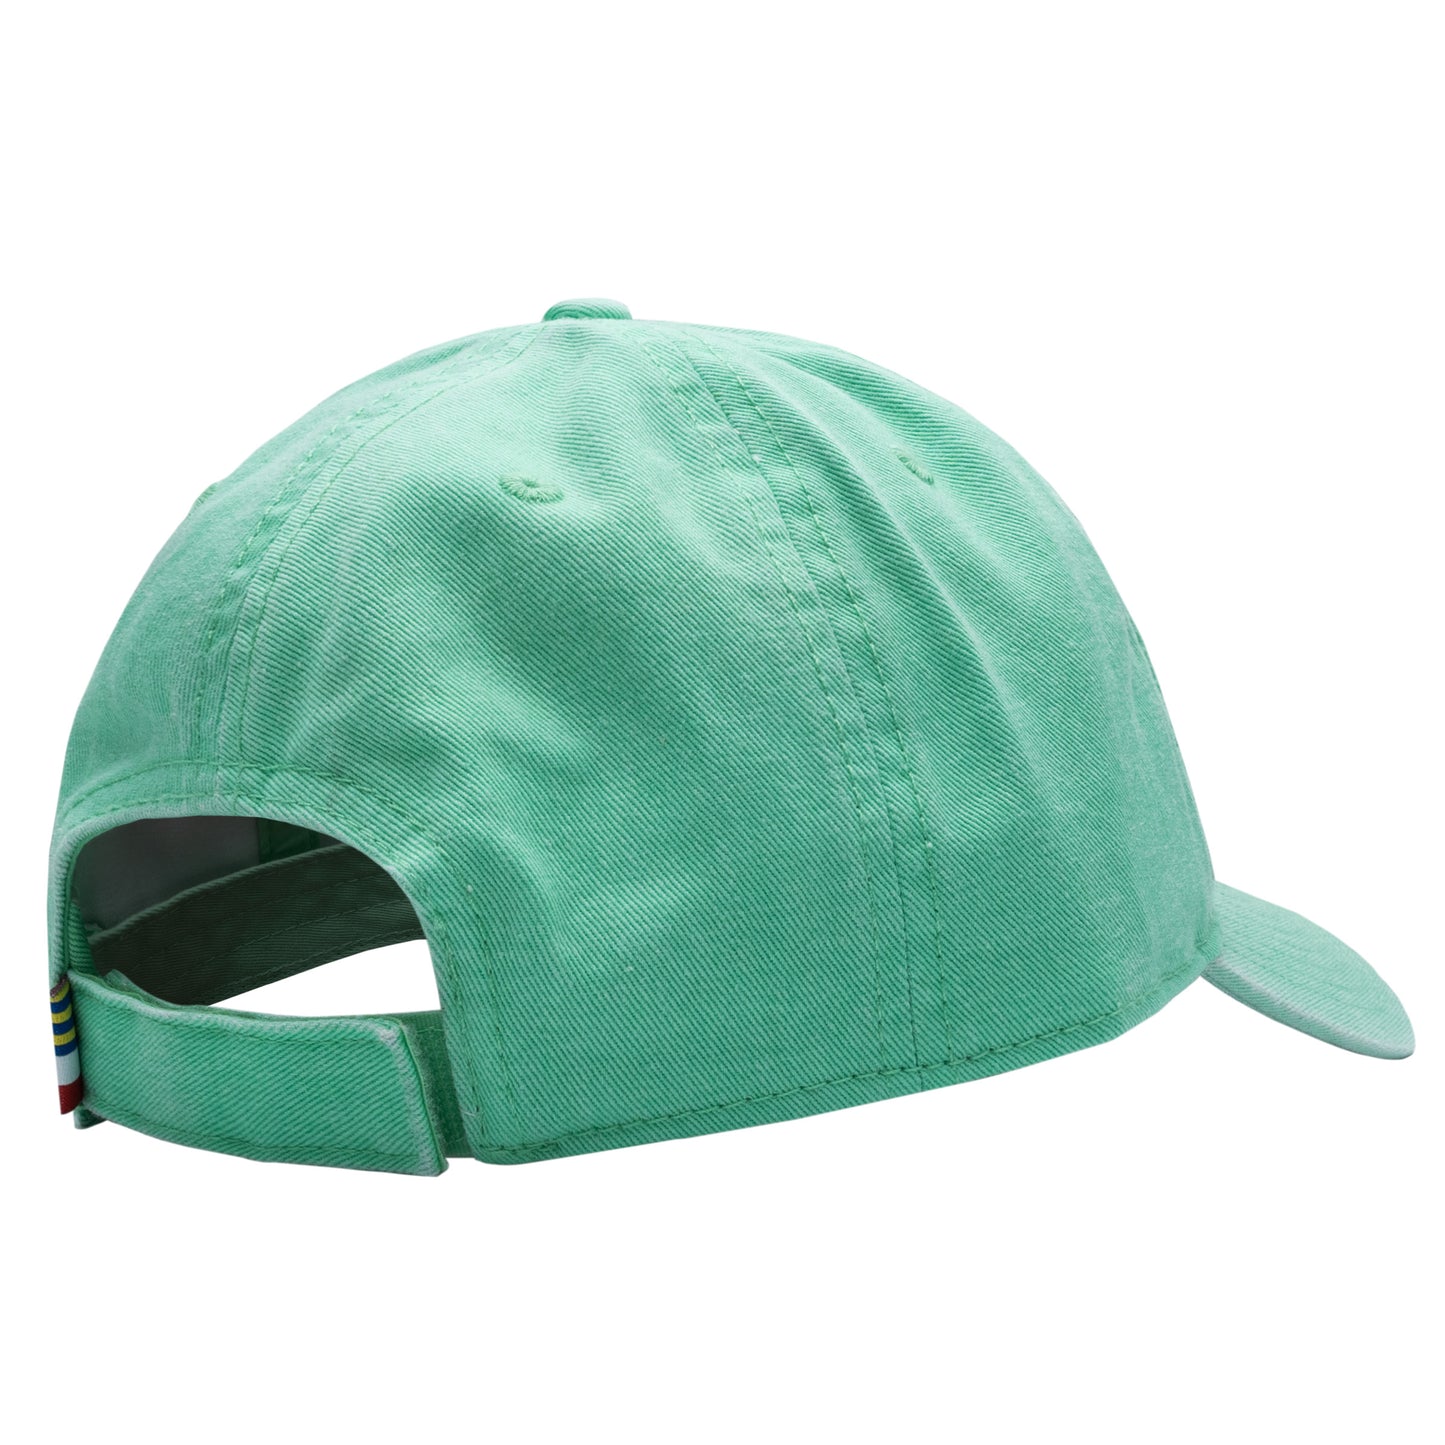 Sketchier Embroidered Unstructured Hat – Guy Harvey